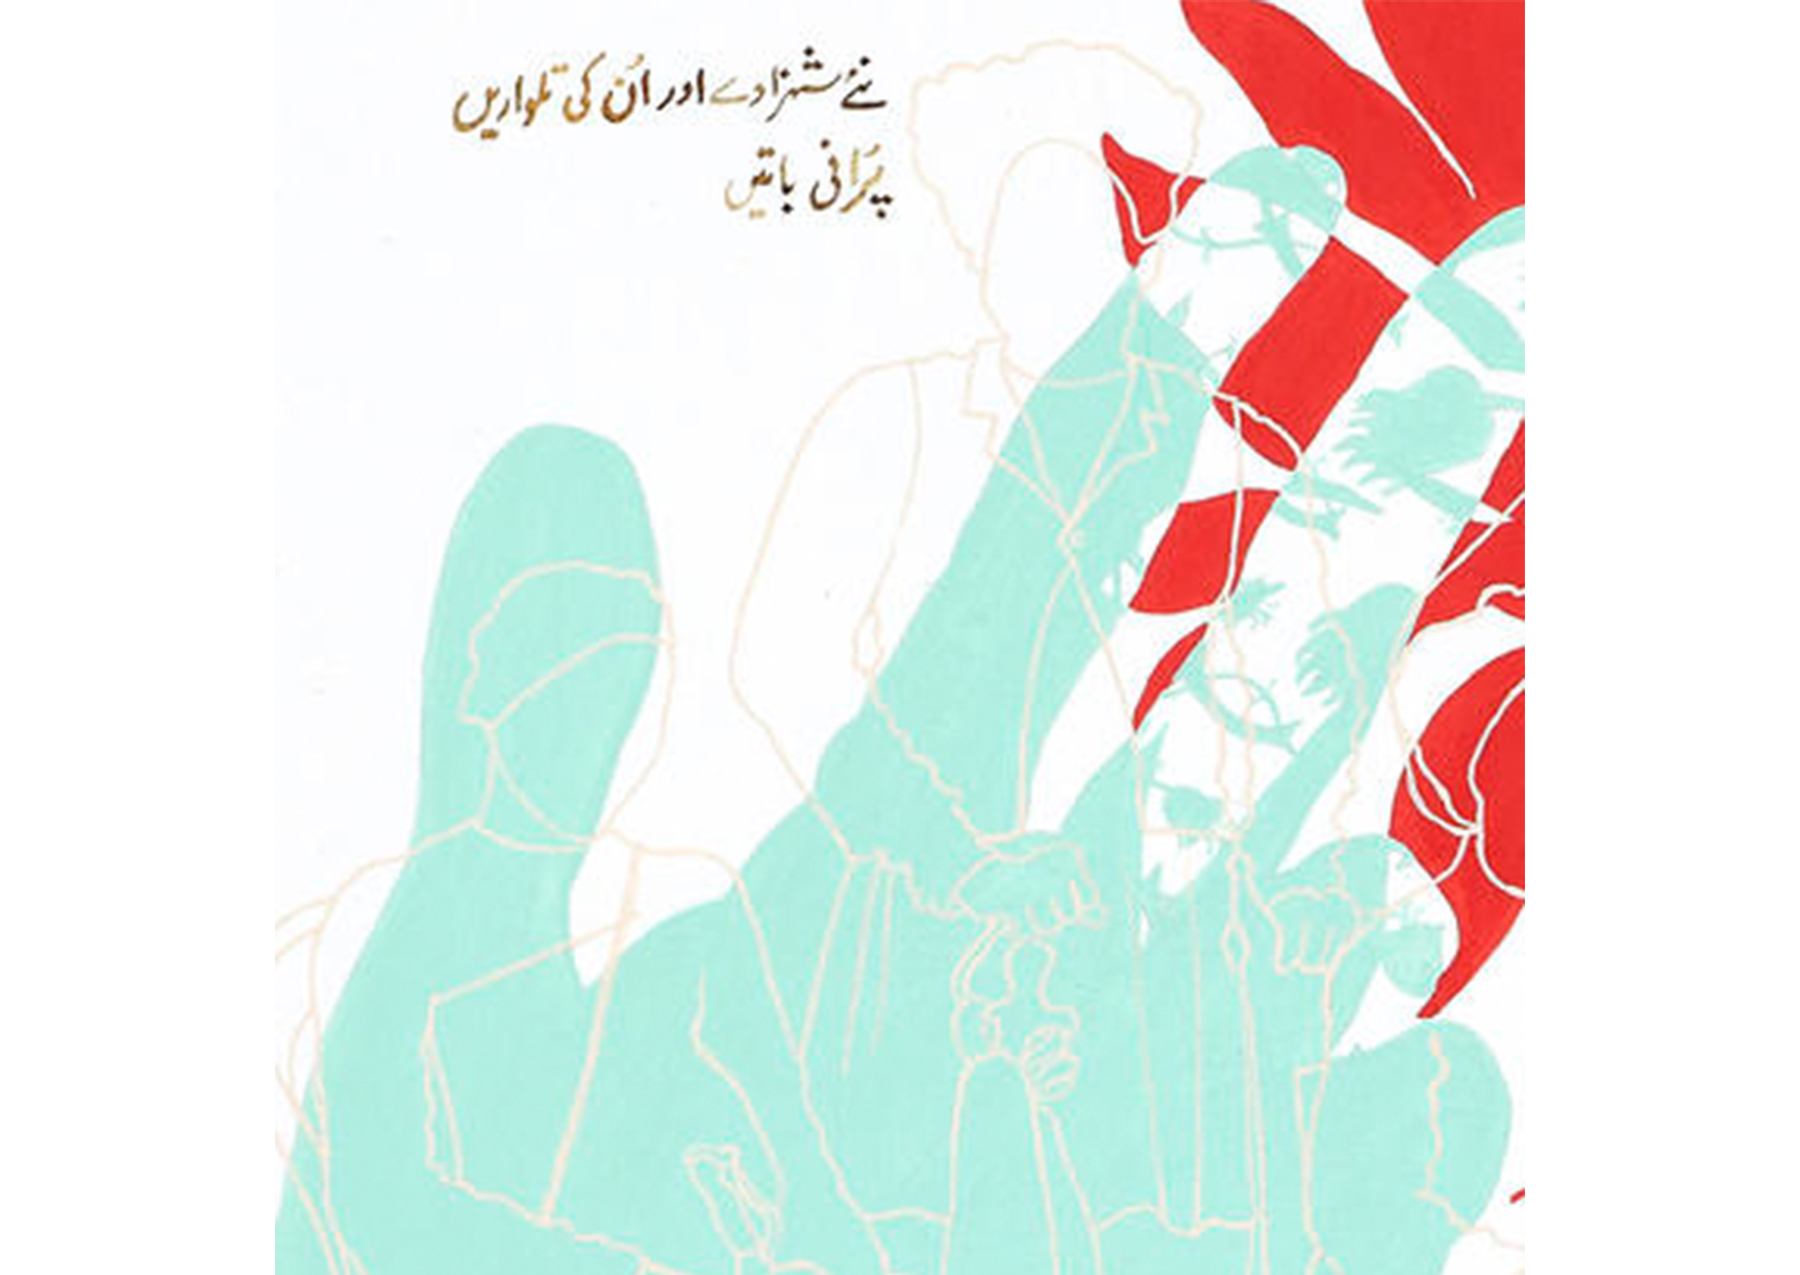 close-up of light green hand touching red flower. text in Urdu in top left corner